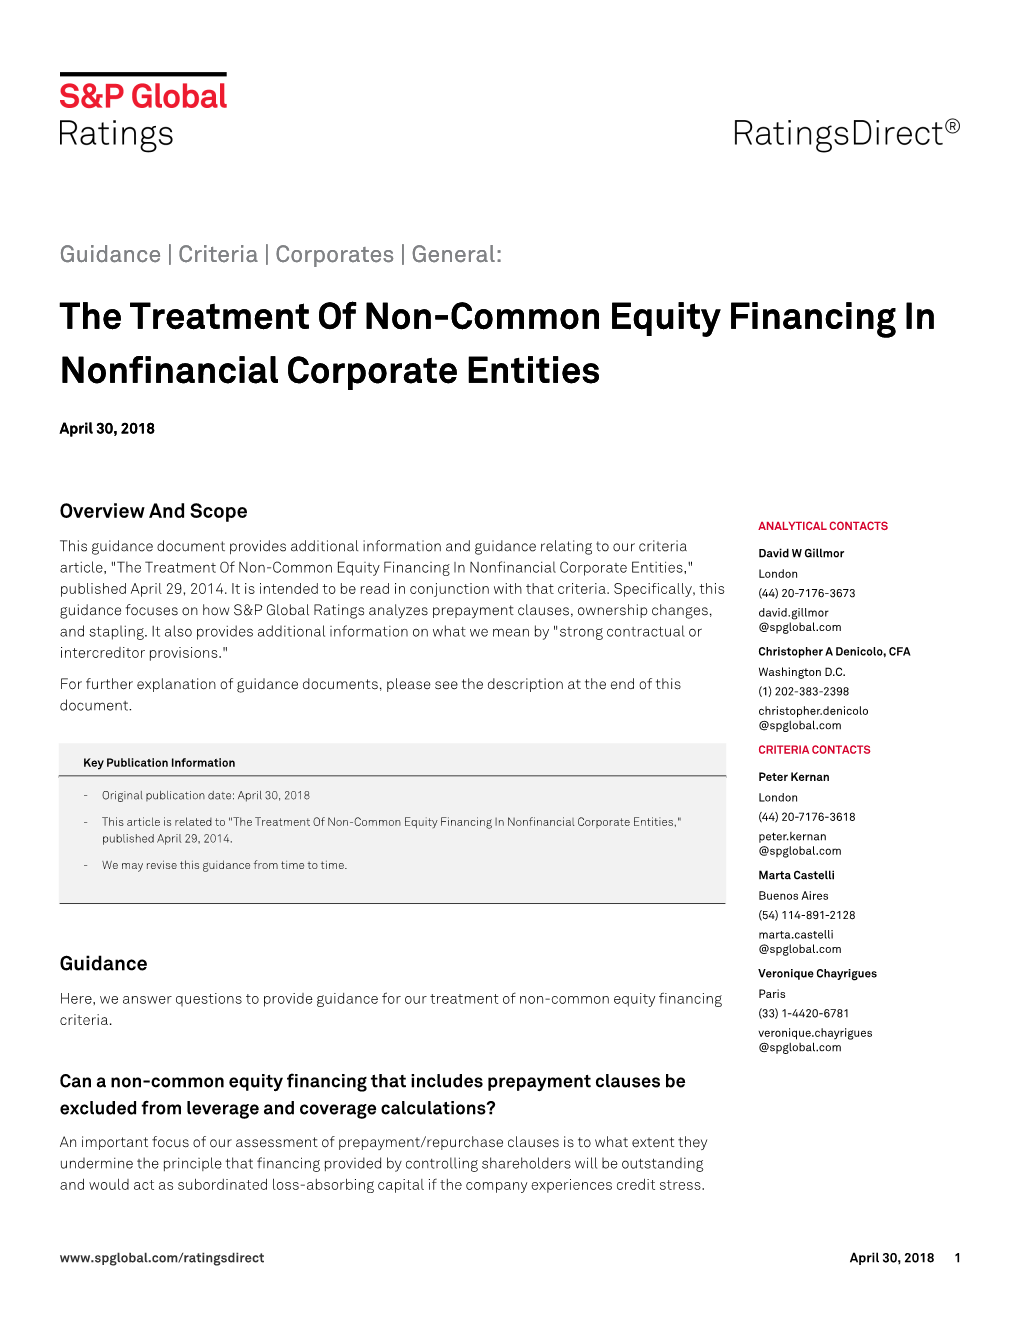 The Treatment of Non-Common Equity Financing in Nonfinancial Corporate Entities